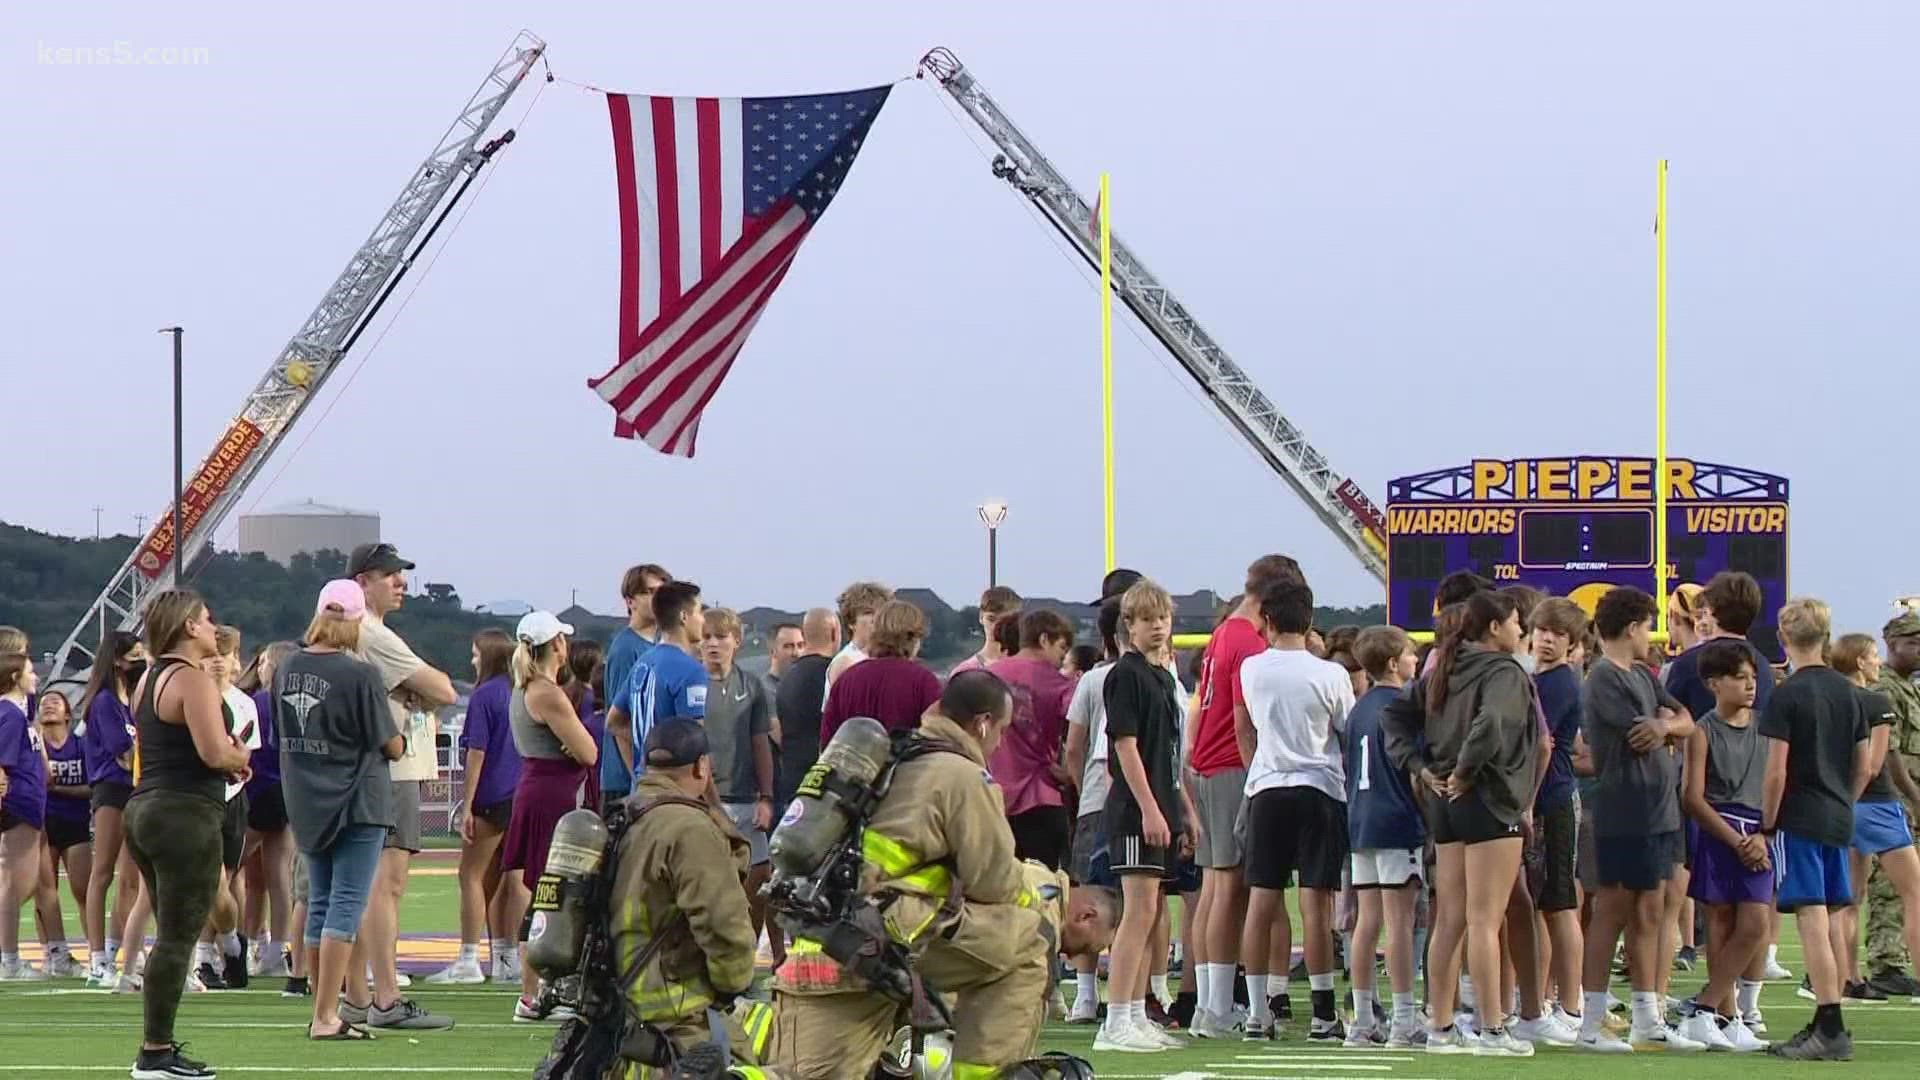 The new school in Comal Independent School District hosted the event at its stadium where firefighters, JROTC members and community members participated.